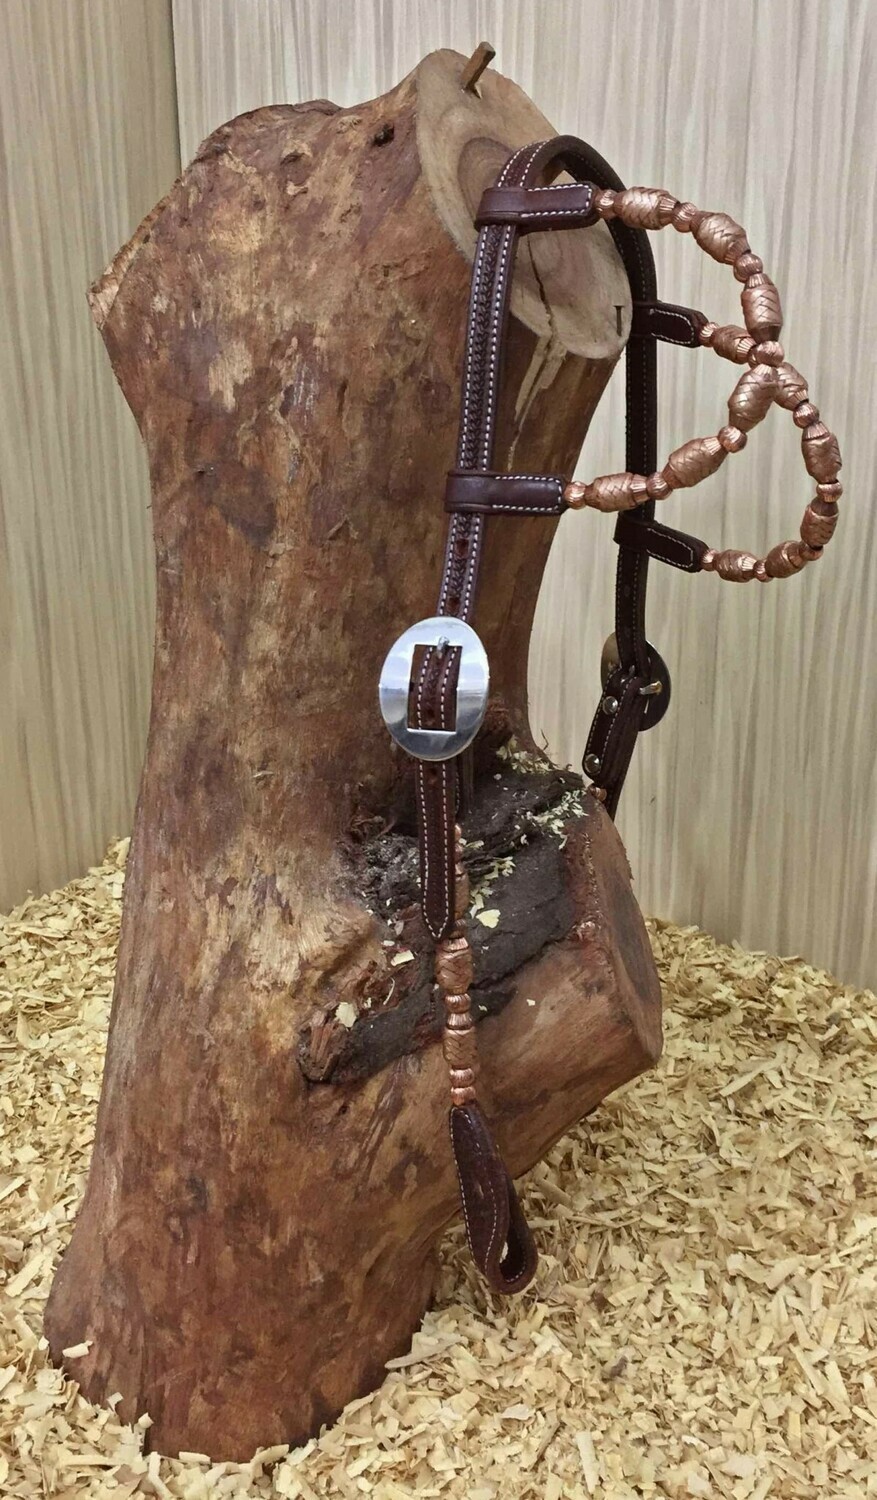 GVR Double ear headstall
With copper balls and barrels